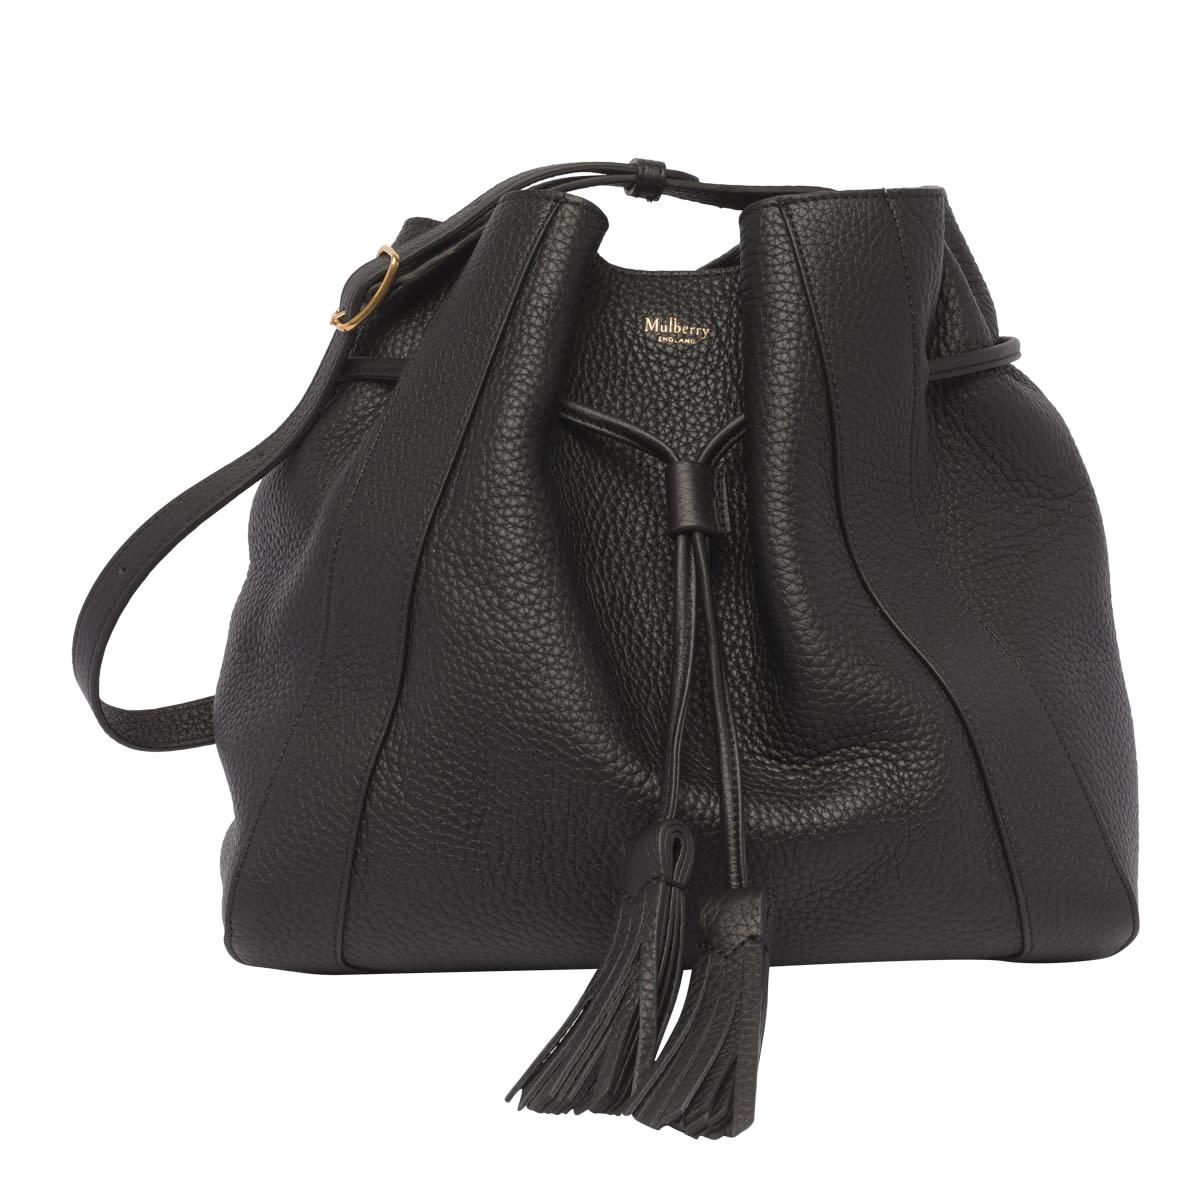 Mulberry Small Millie Tote Bag in Black | Lyst